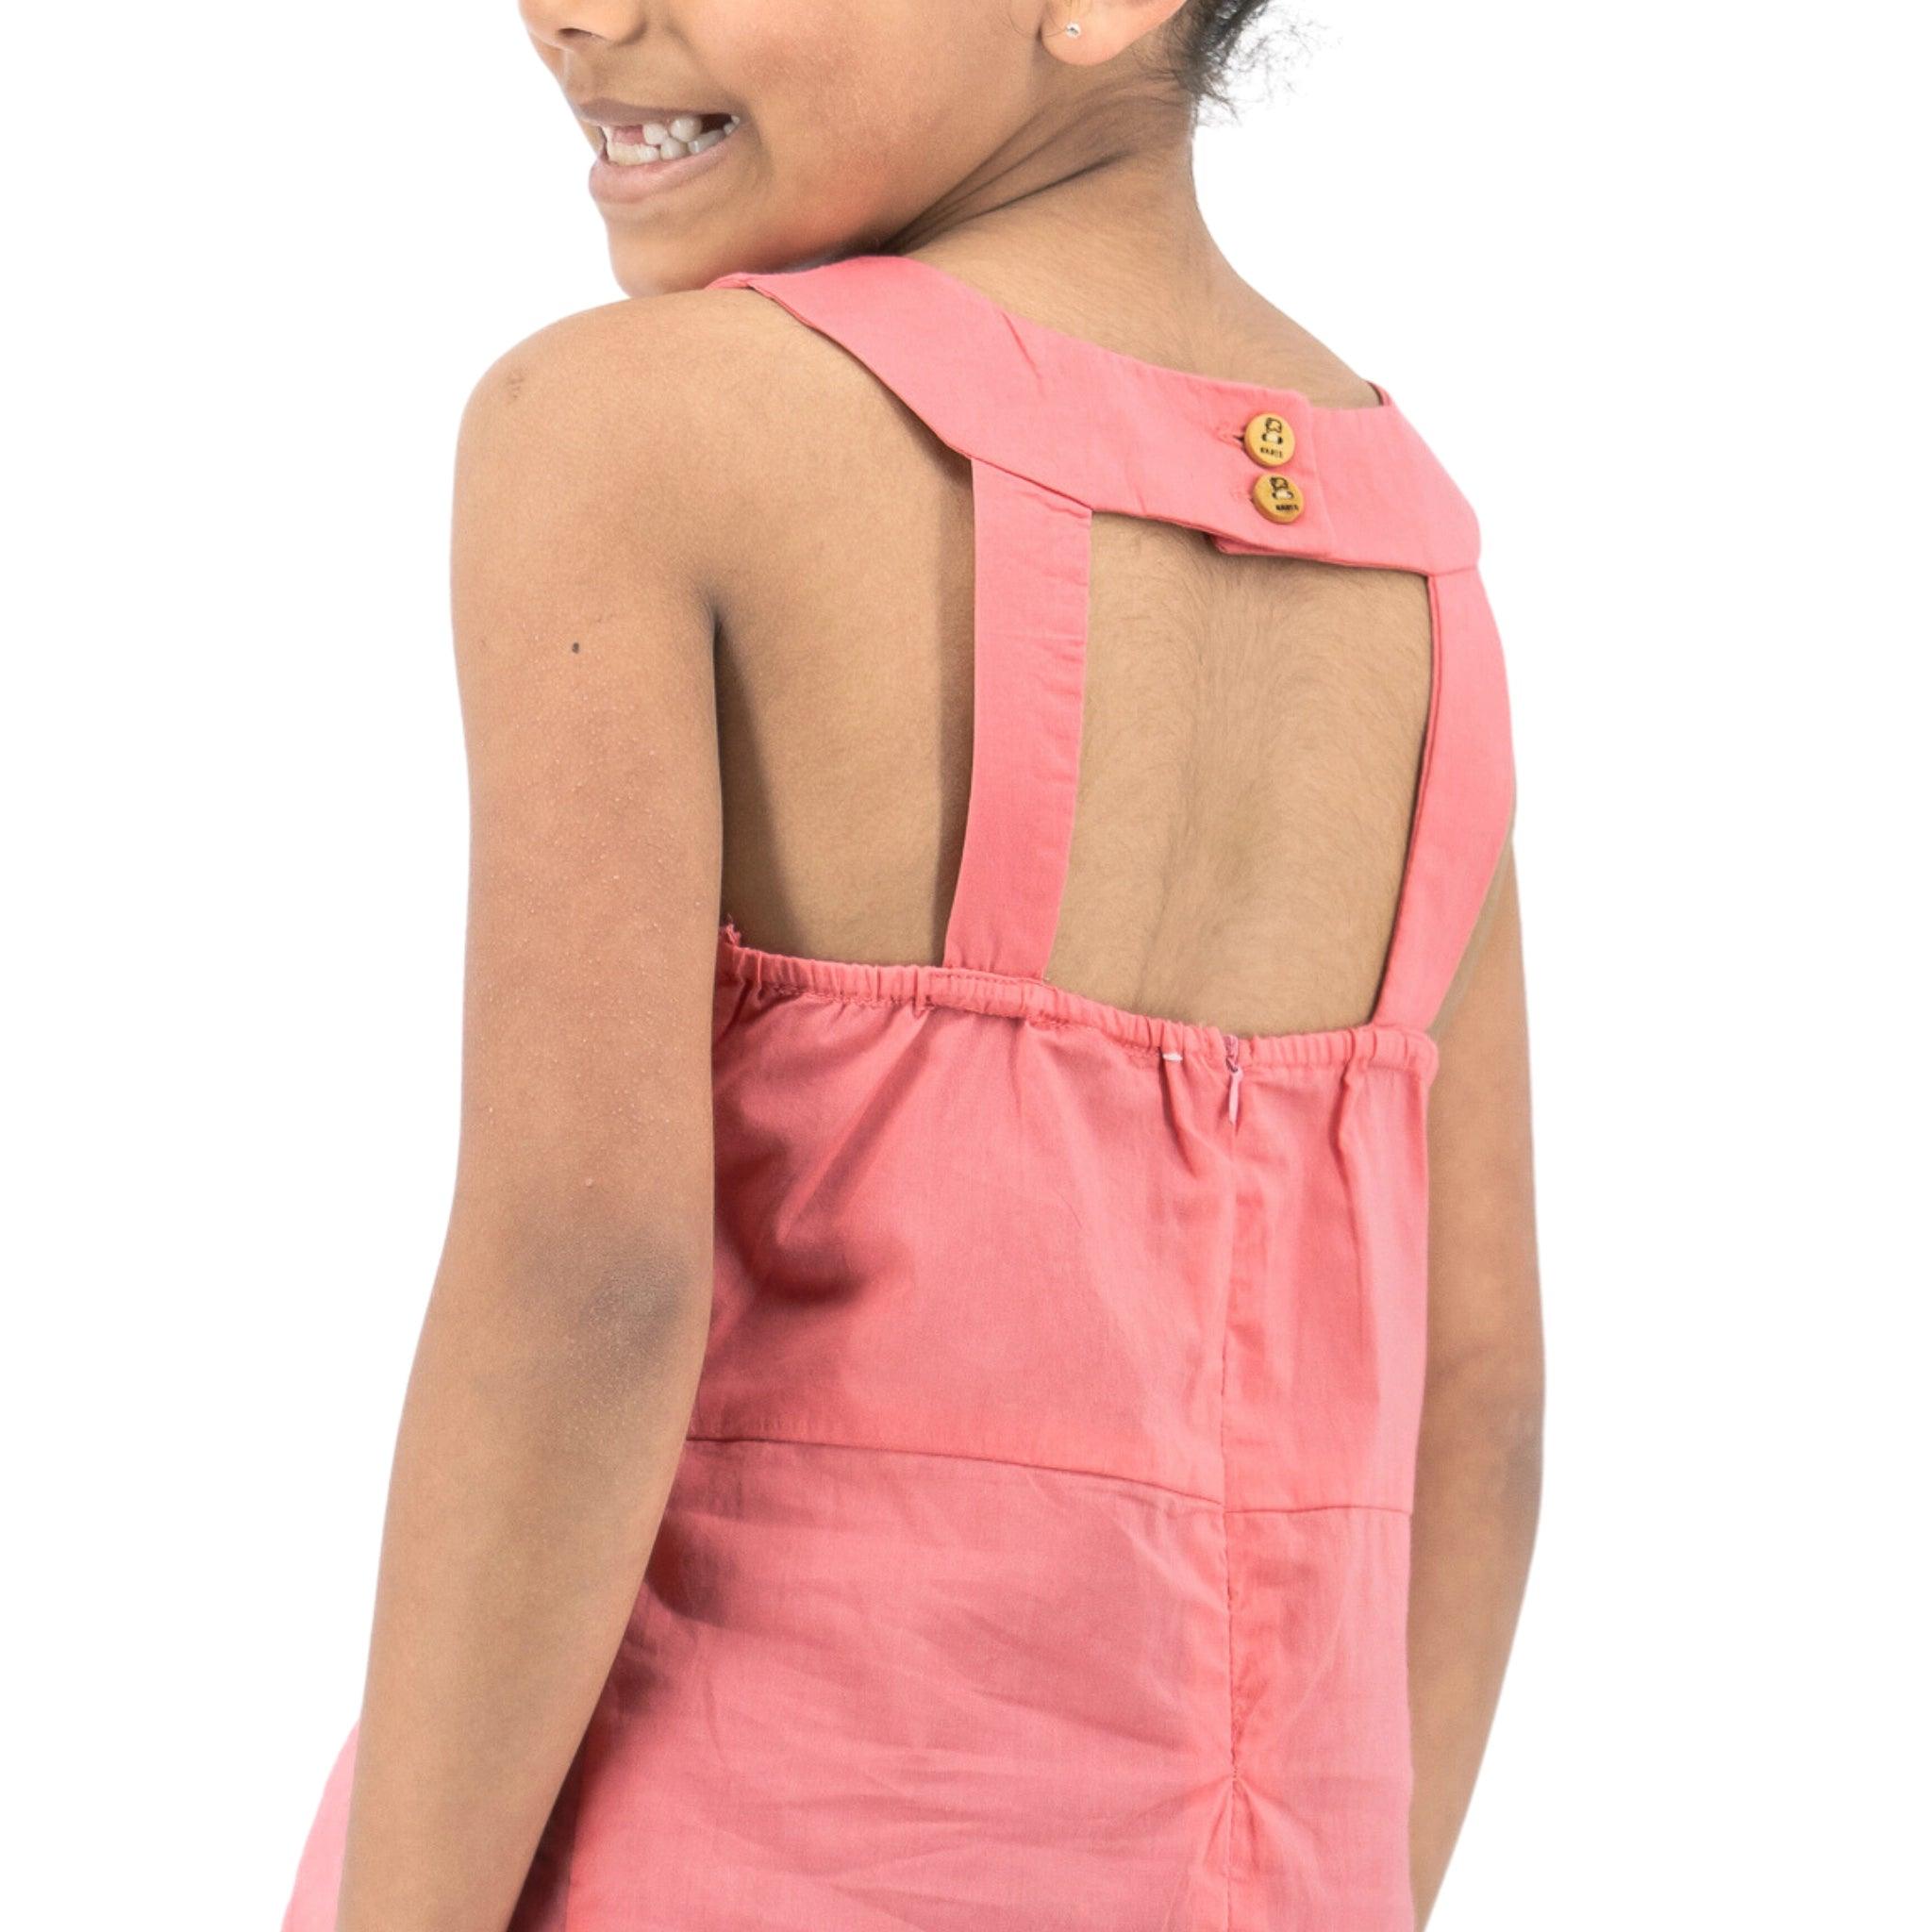 Young girl in a pink, Karee Tea Rose Cotton Bib Neck Top for kids turning her head to smile, viewed from behind against a white background.